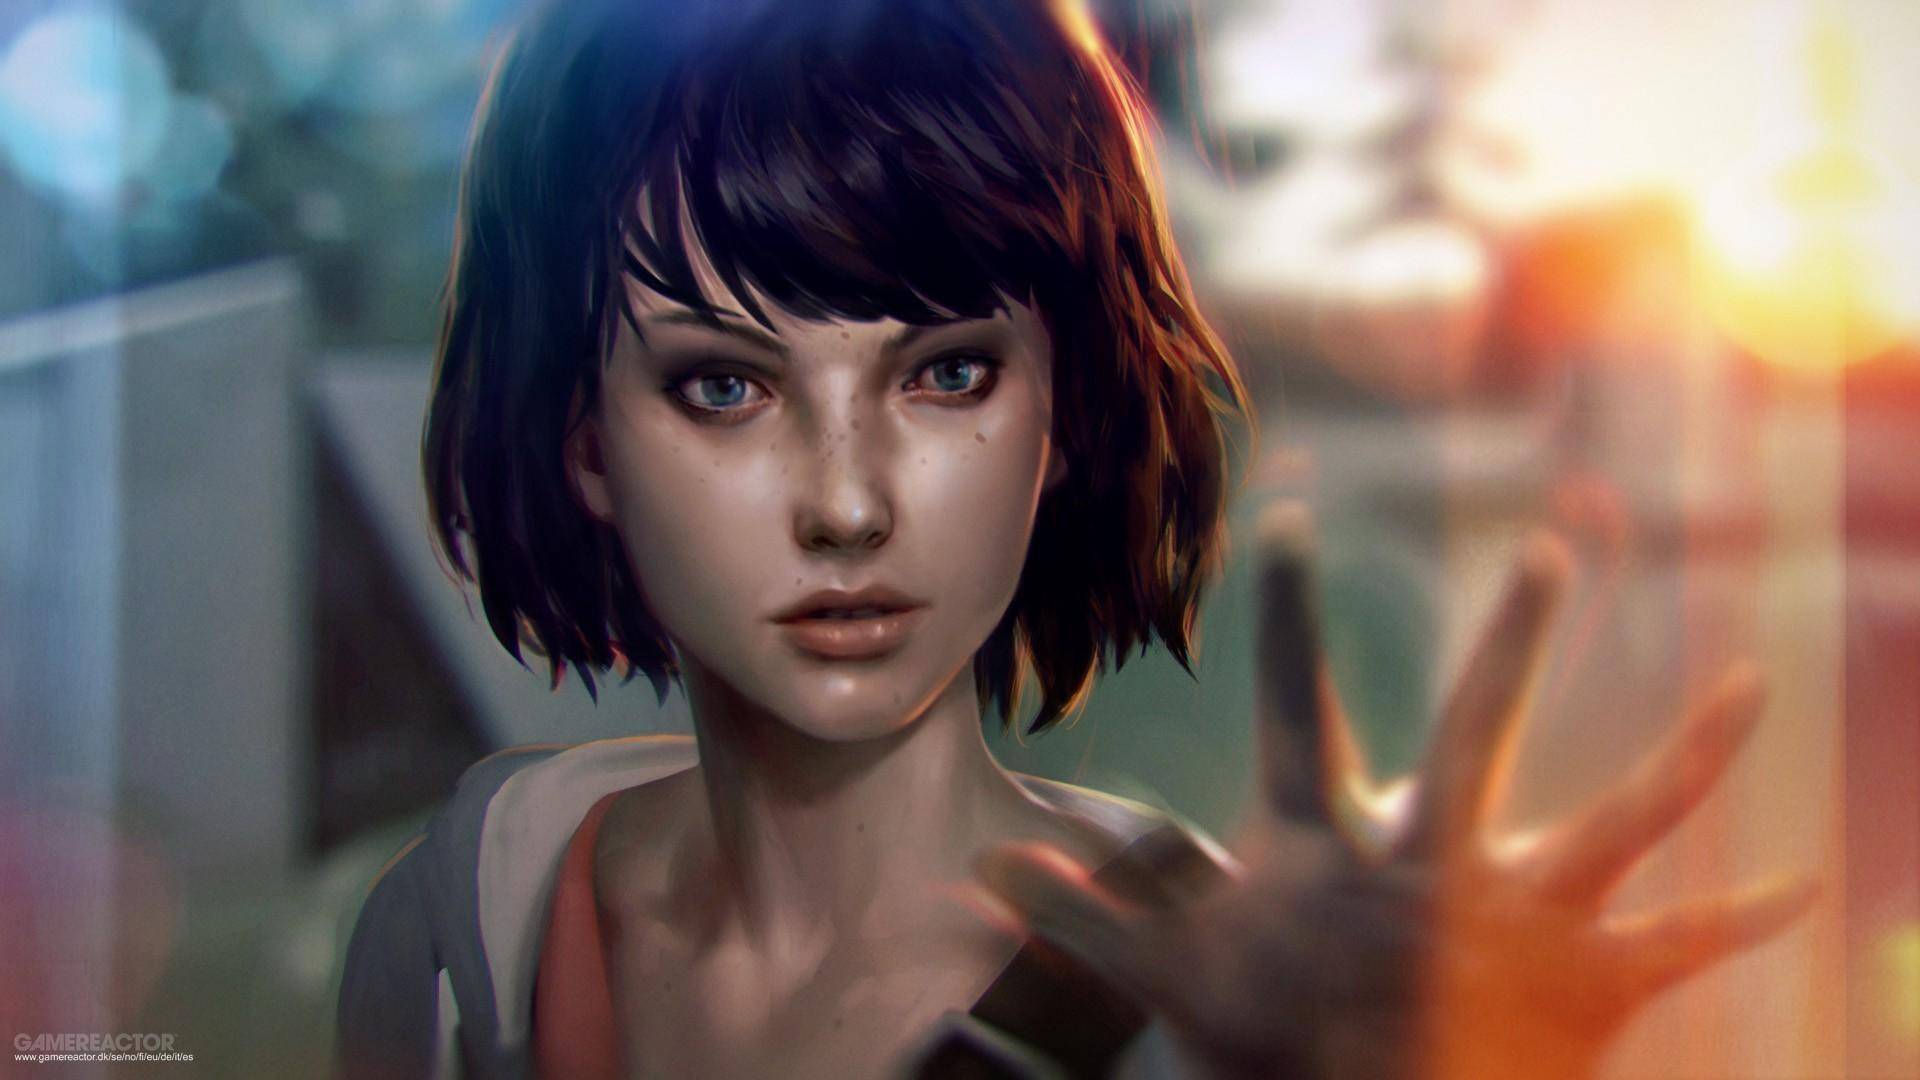 Some details about Life is Strange 3 have been leaked